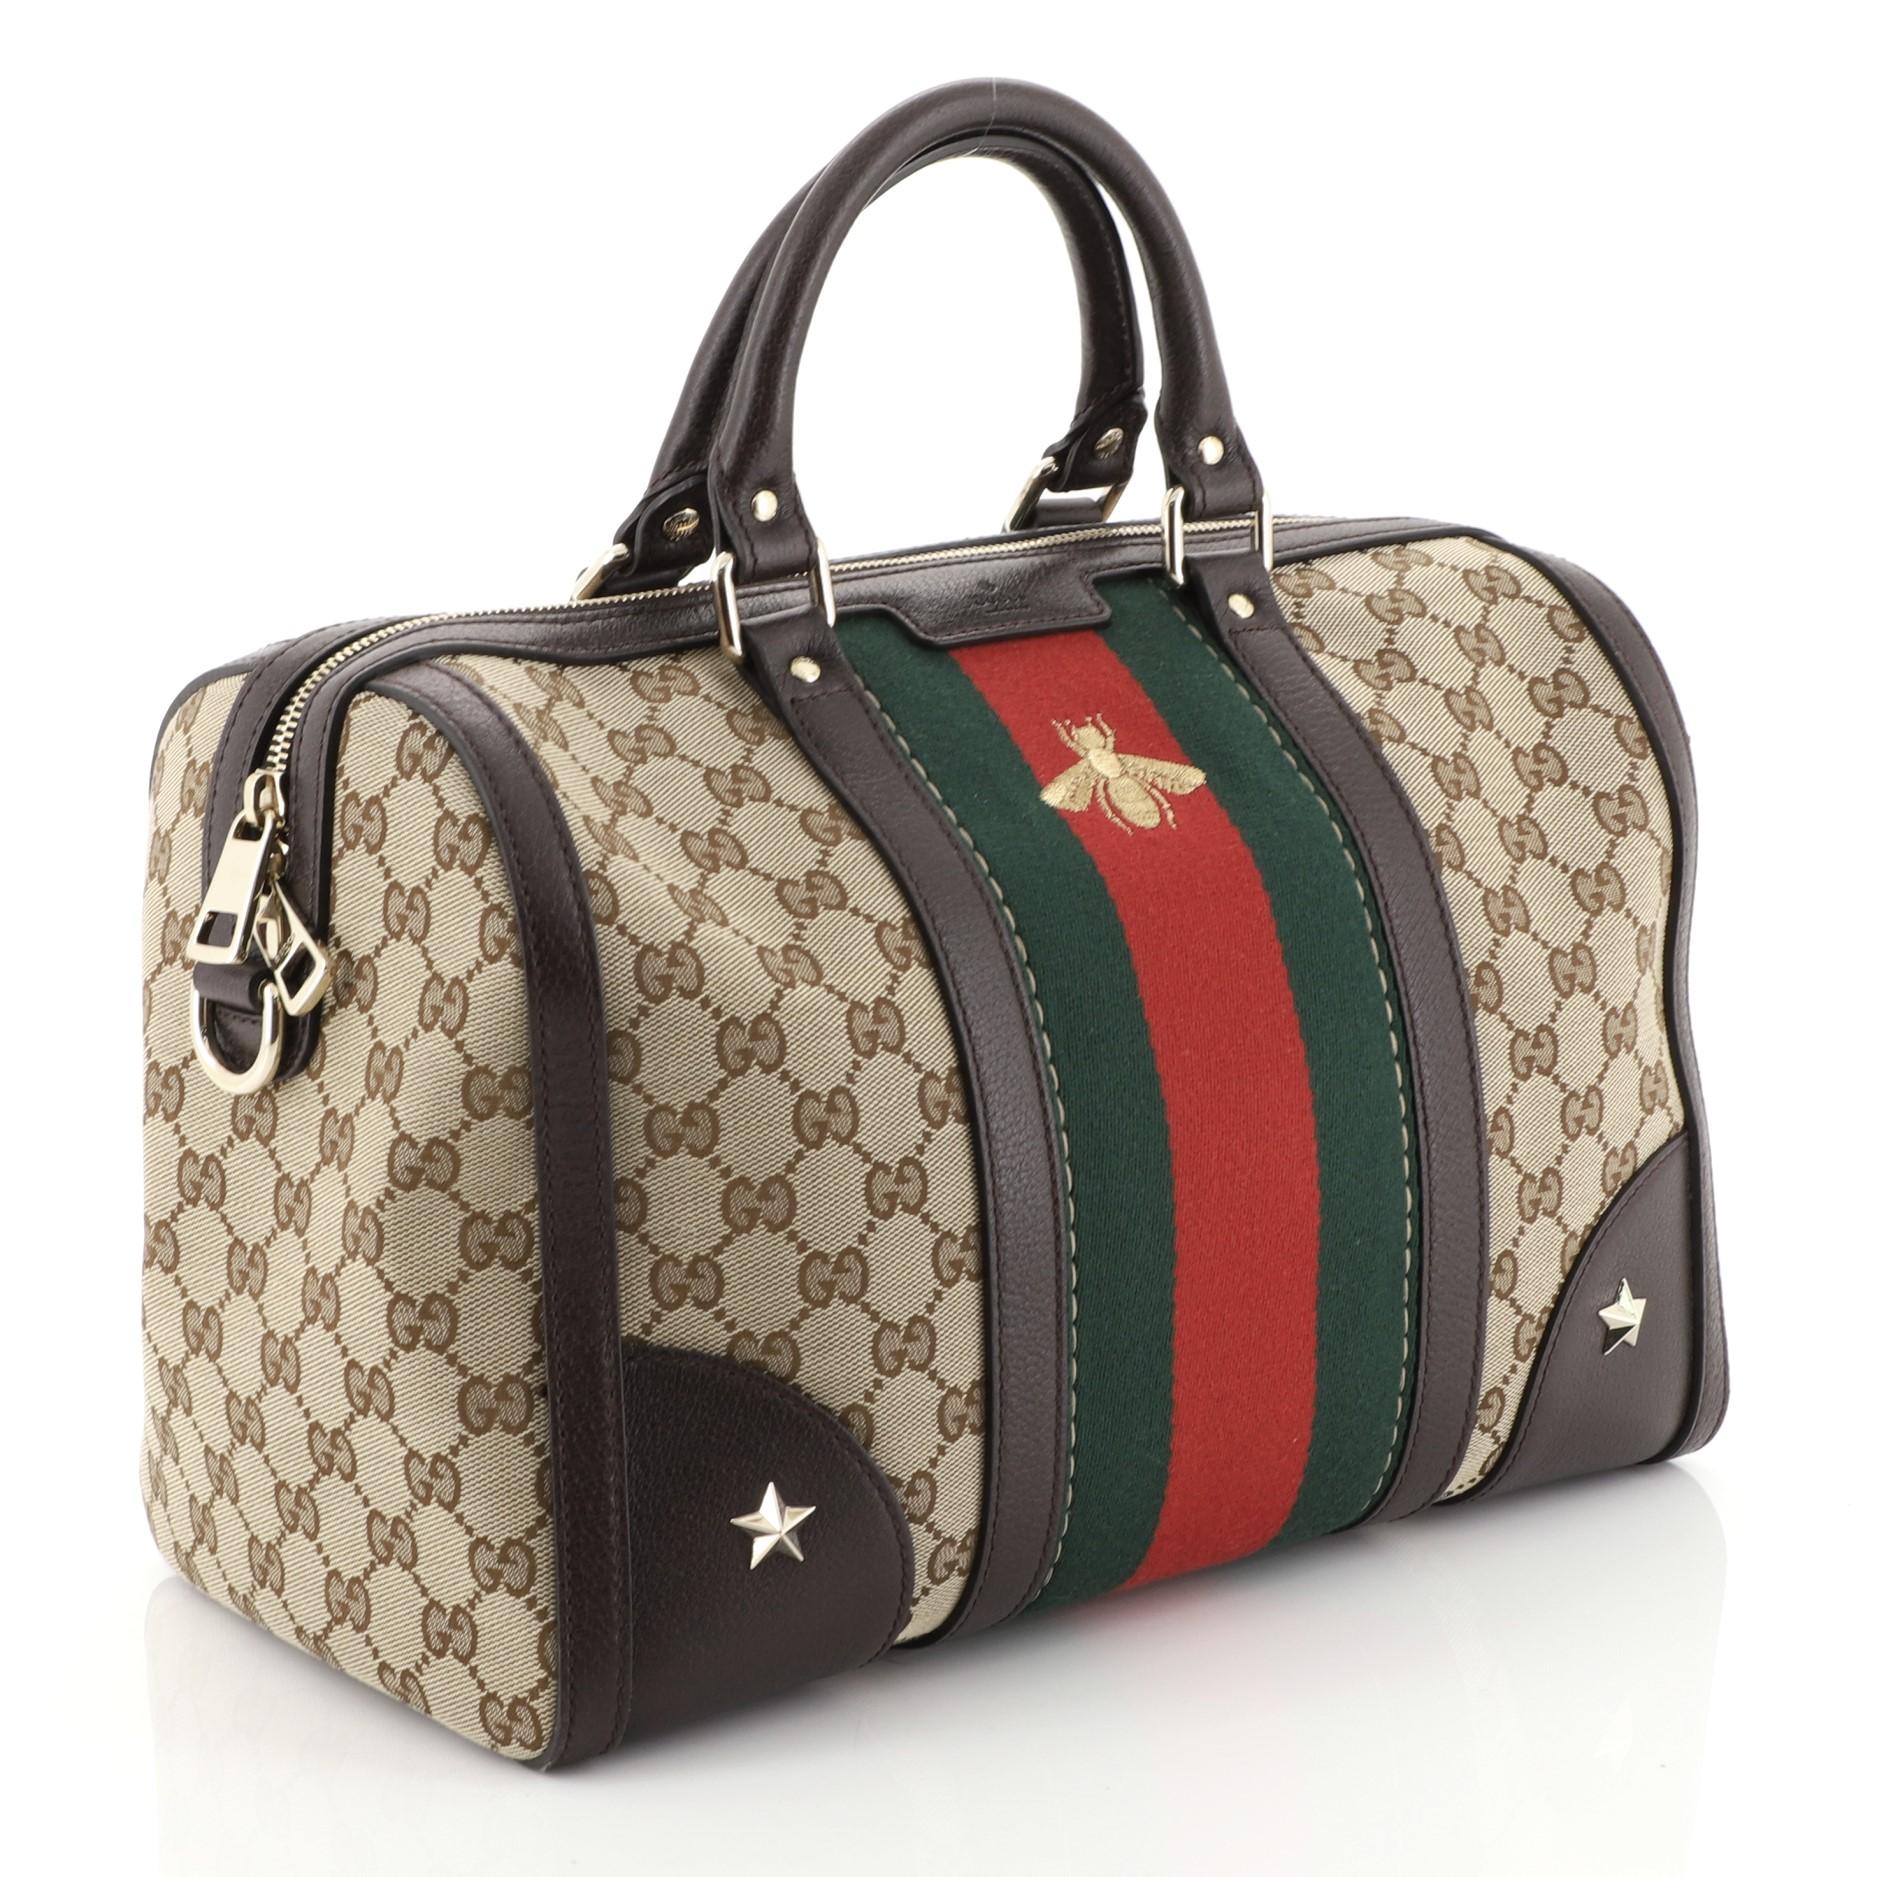 This Gucci Vintage Bee Web Boston Bag GG Canvas Medium, crafted with brown GG canvas with brown leather trims, features signature iconic Gucci green and red web stripe with a golden embroidered bee at the front, dual-rolled handles, protective base